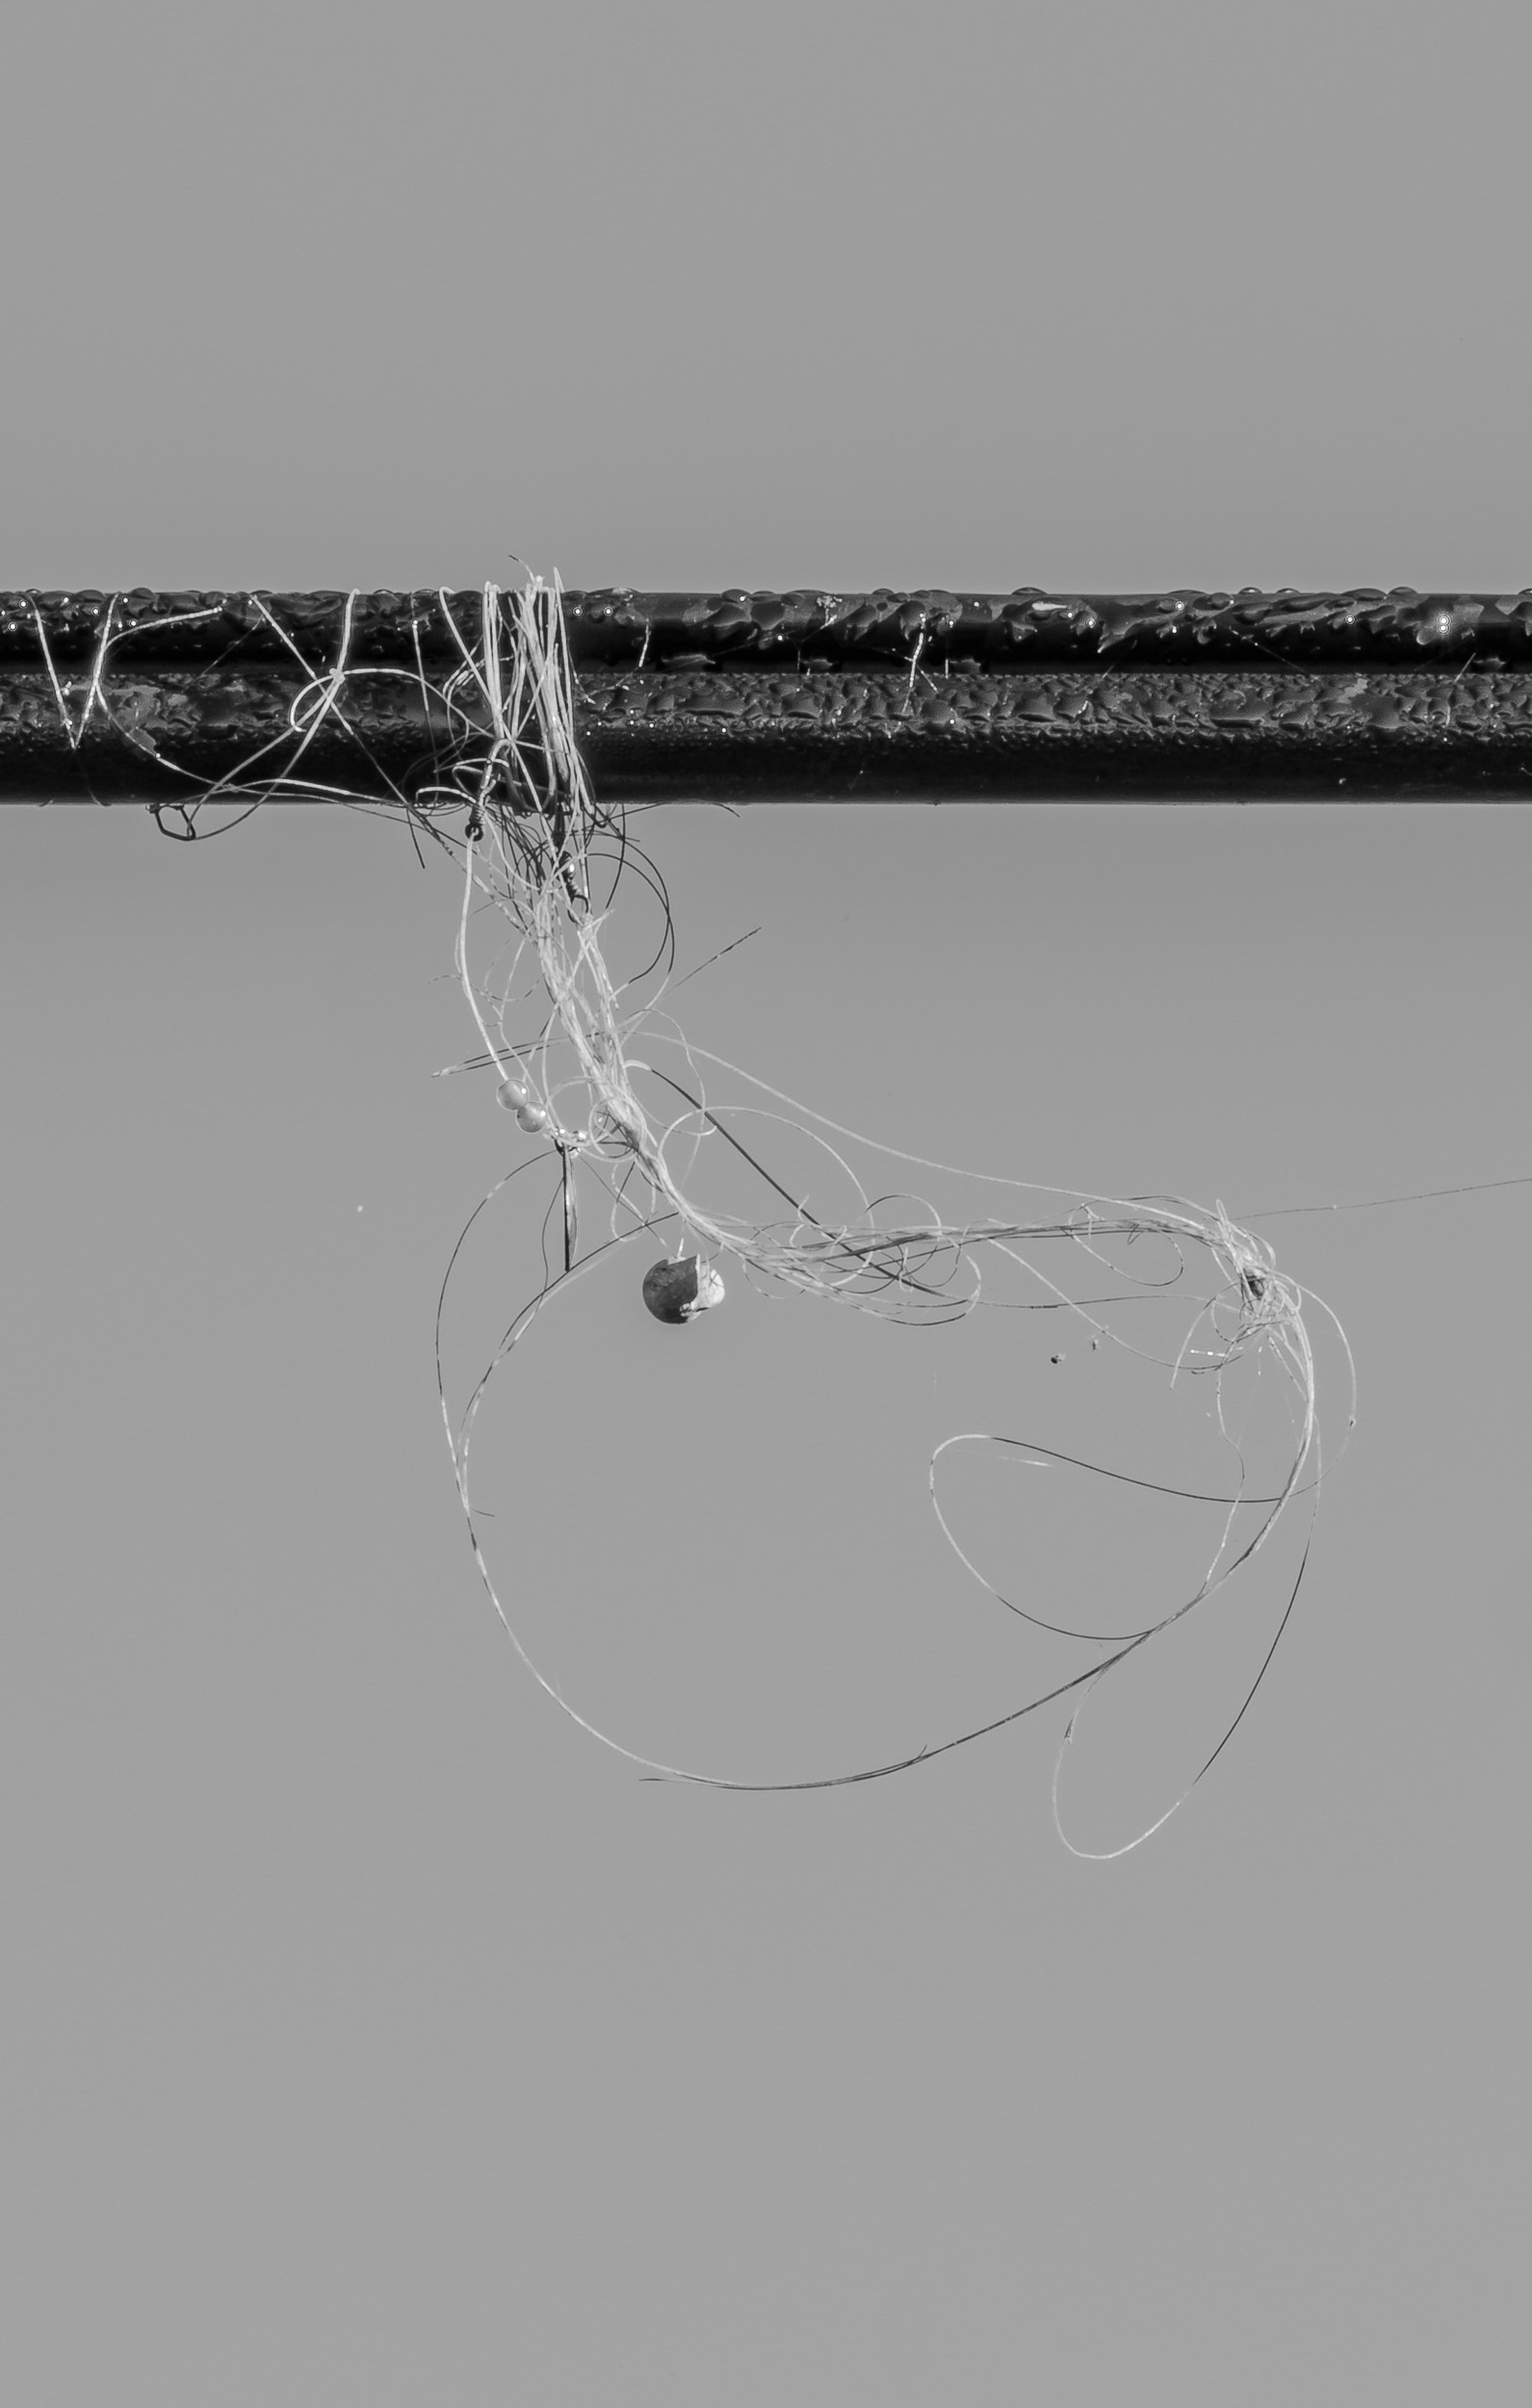 loops of fishing line and single weight hanging from utility line